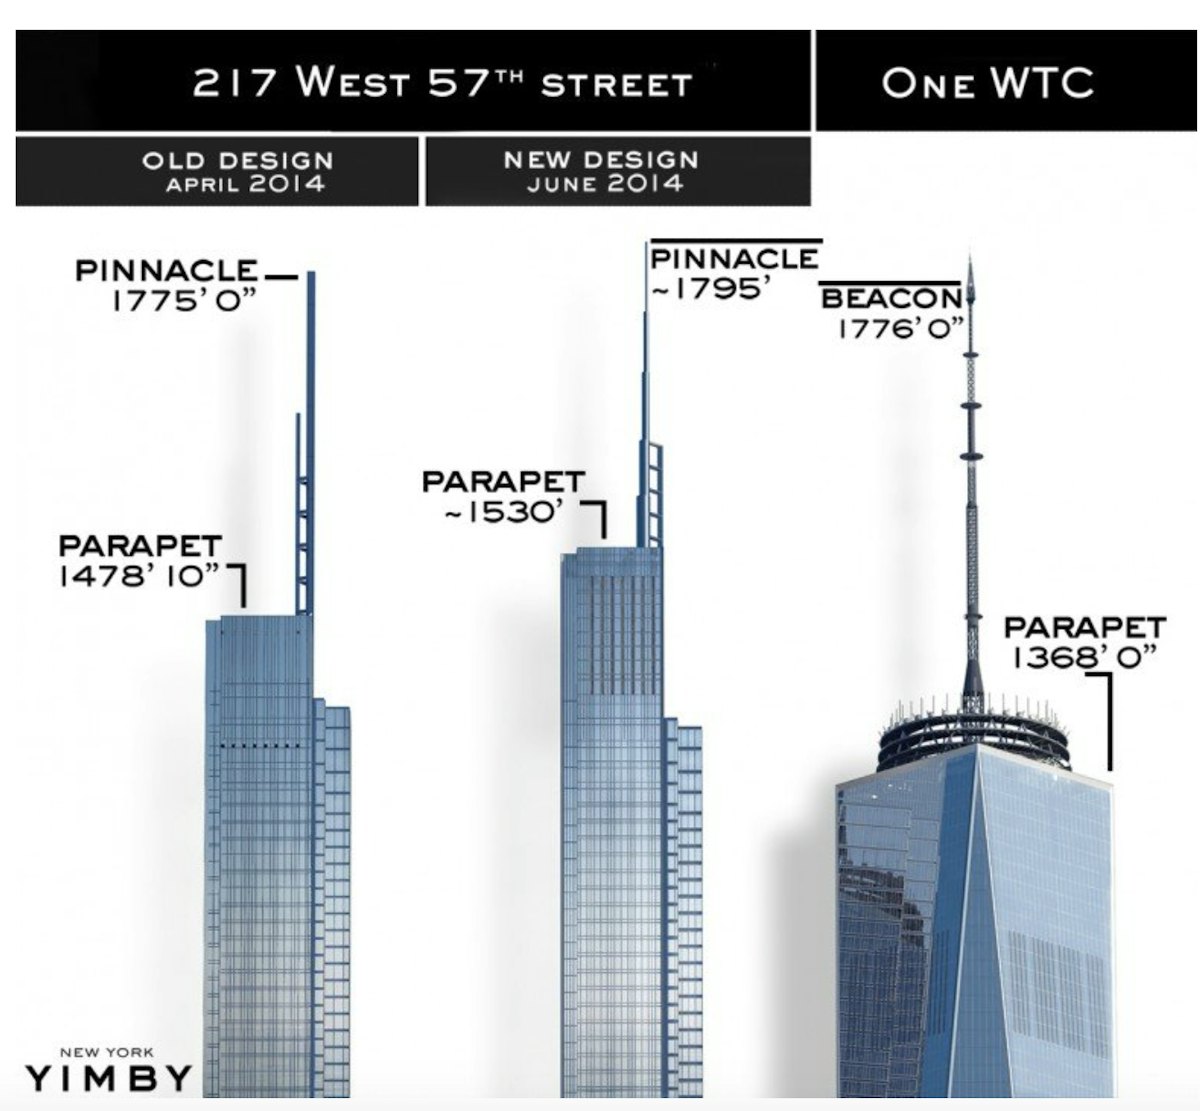 Revealed: Extell's 1,423-foot Nordstrom Tower - New York YIMBY